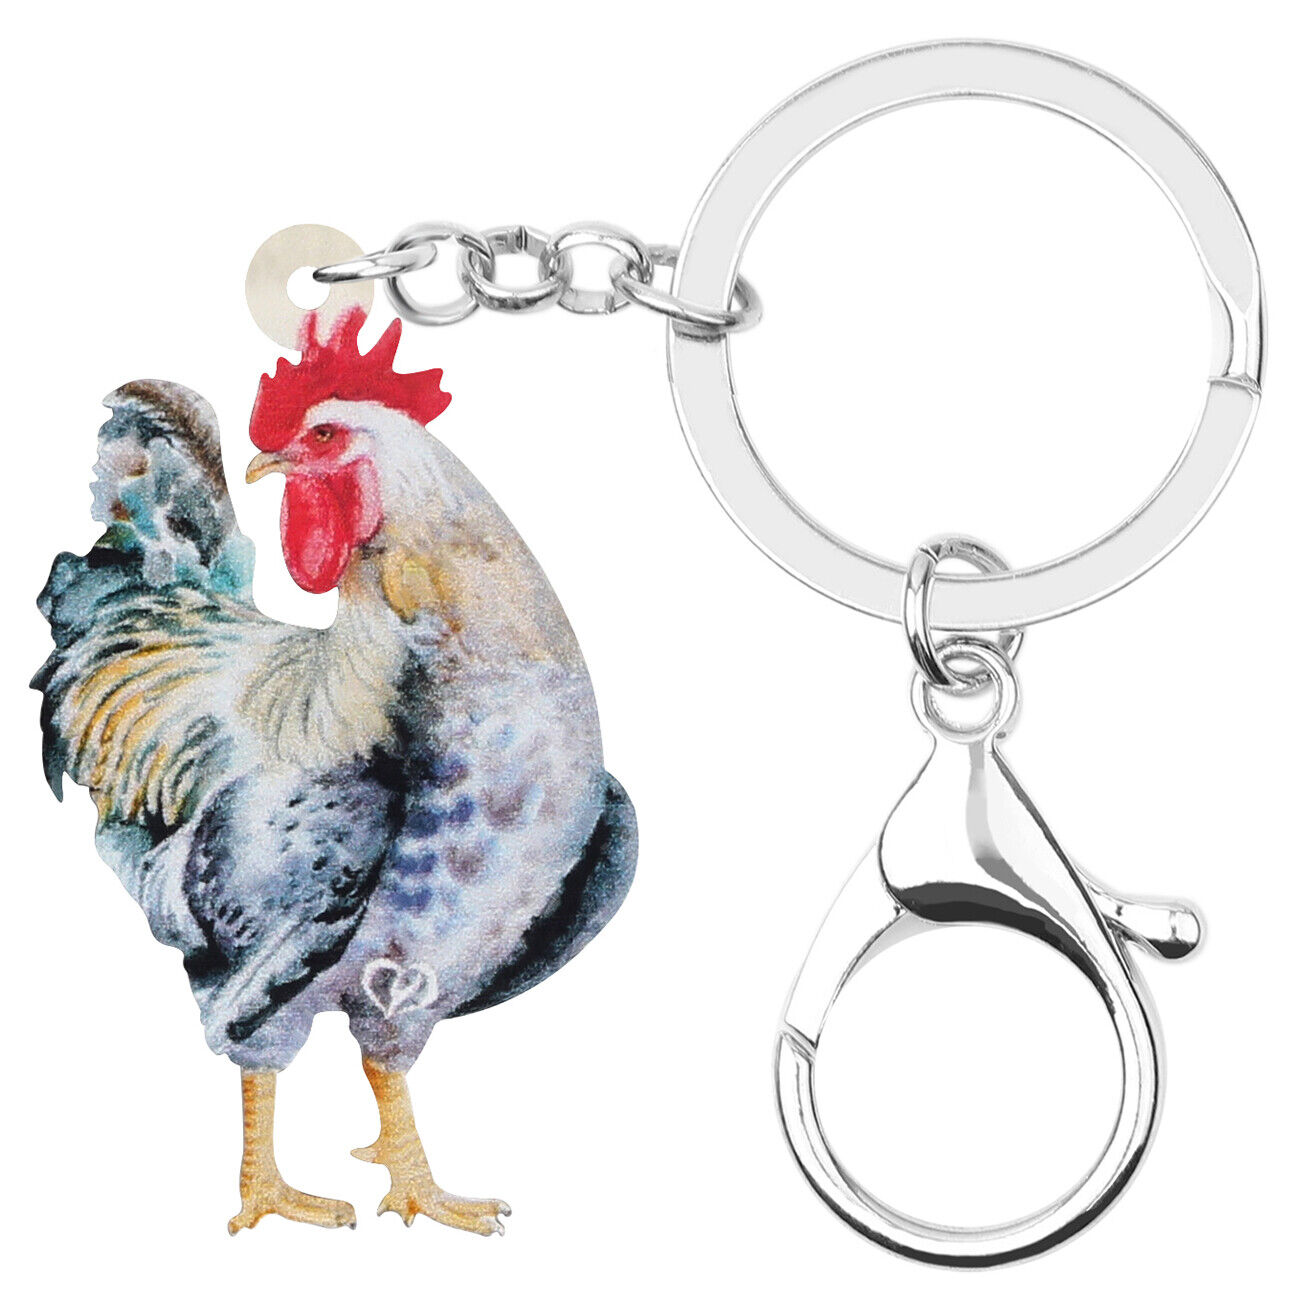 Acrylic Cute Rooster Chicken Keychains Purse Key Ring Farm Animals Charms Gifts